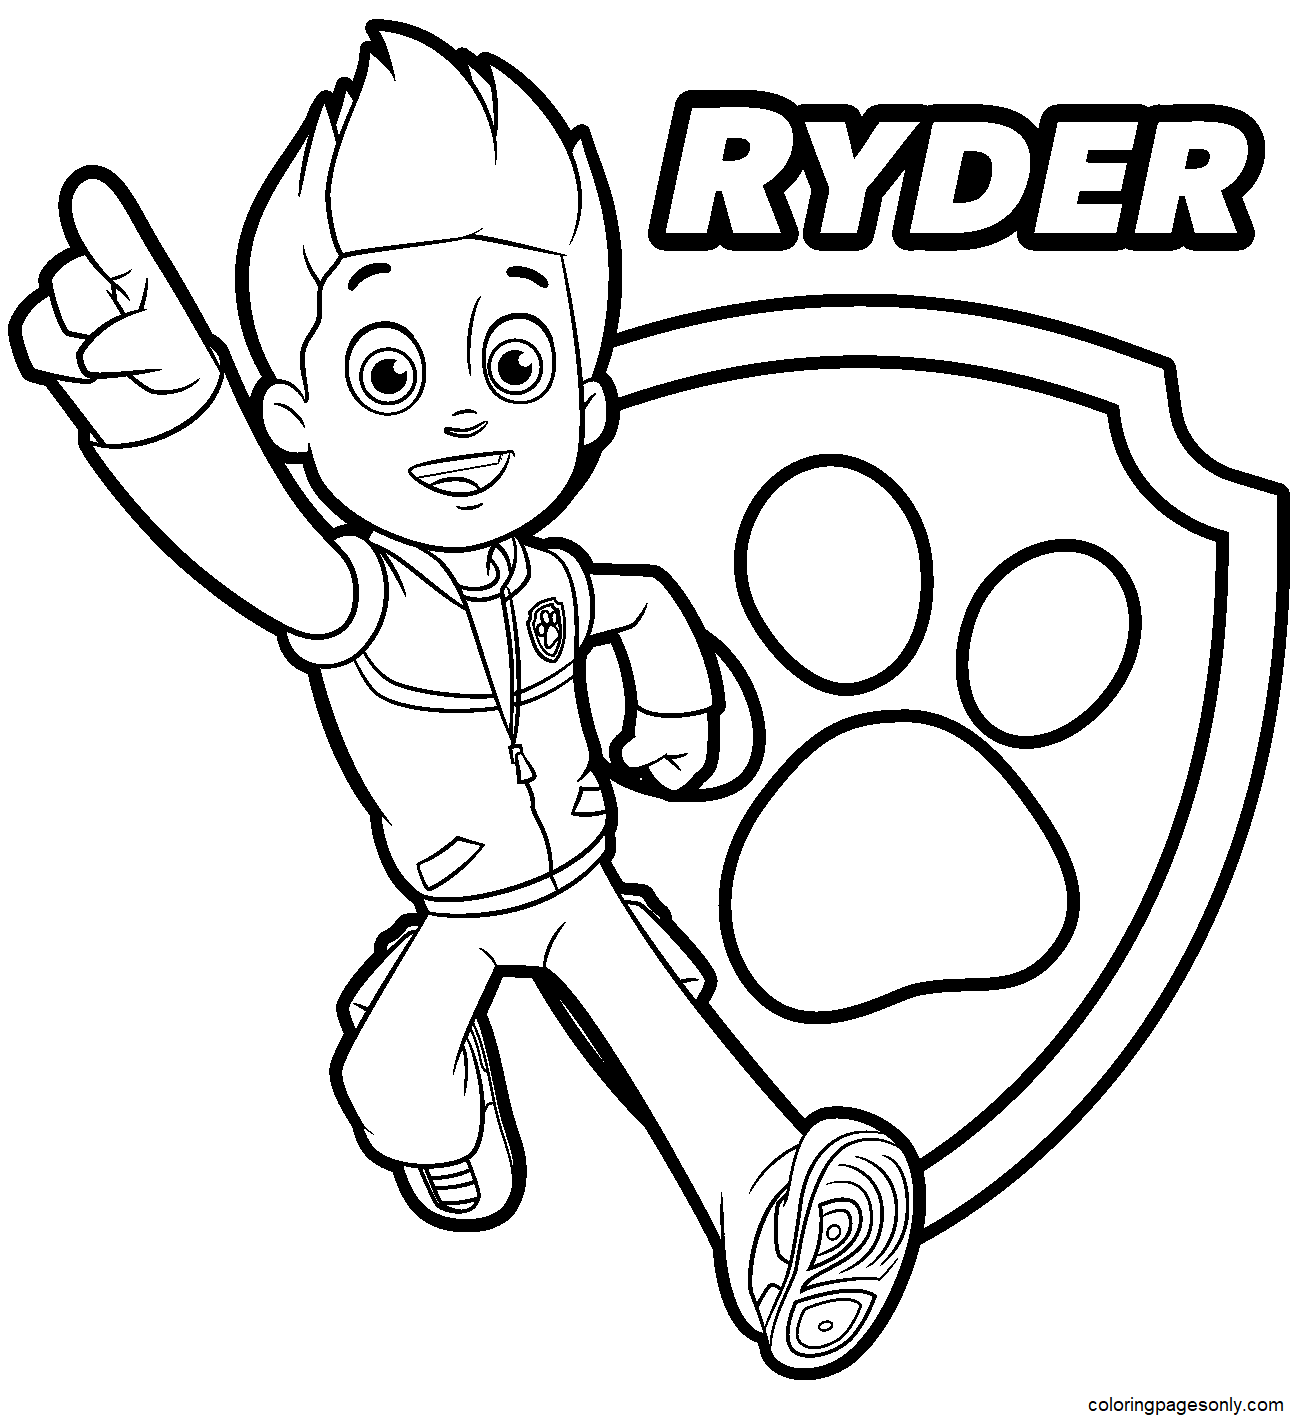 Paw Patrol Ryder 1 Coloring Pages